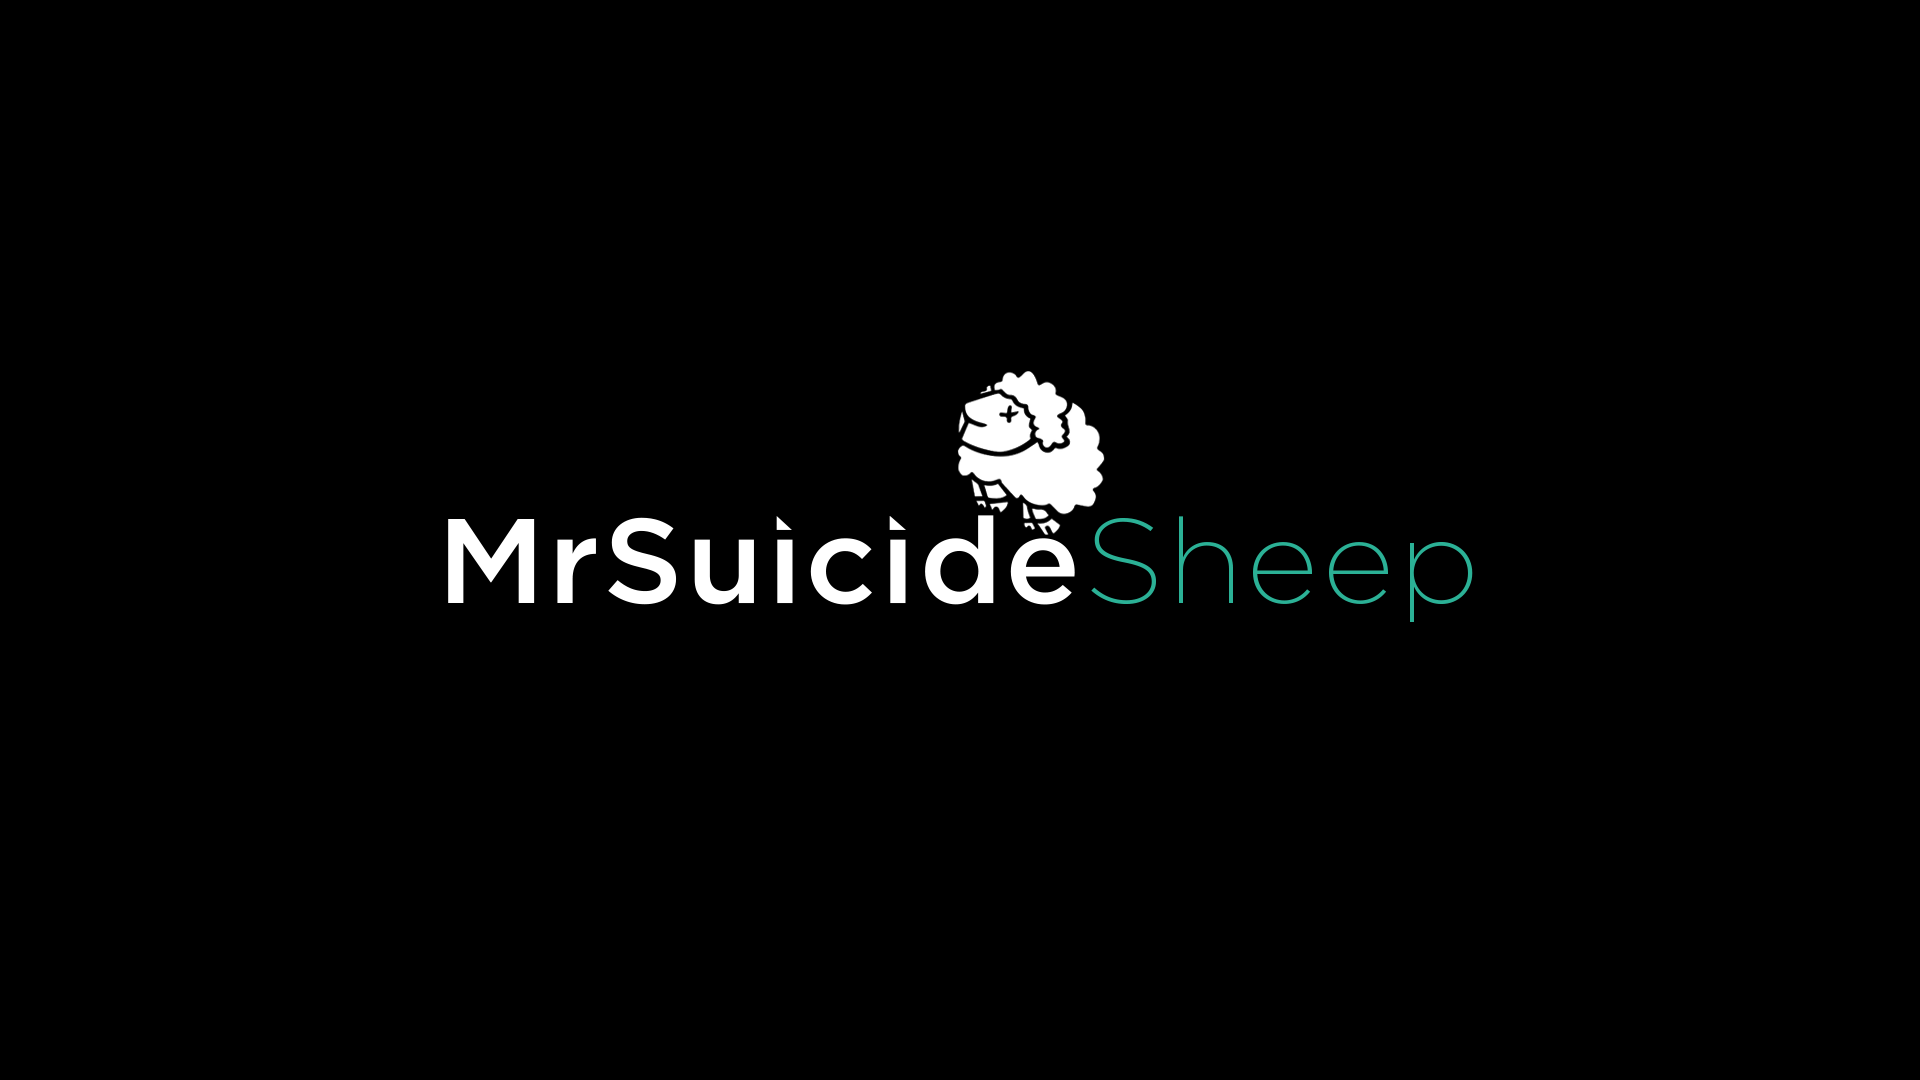 General 1920x1080 Suicide Sheep text minimalism black background simple background